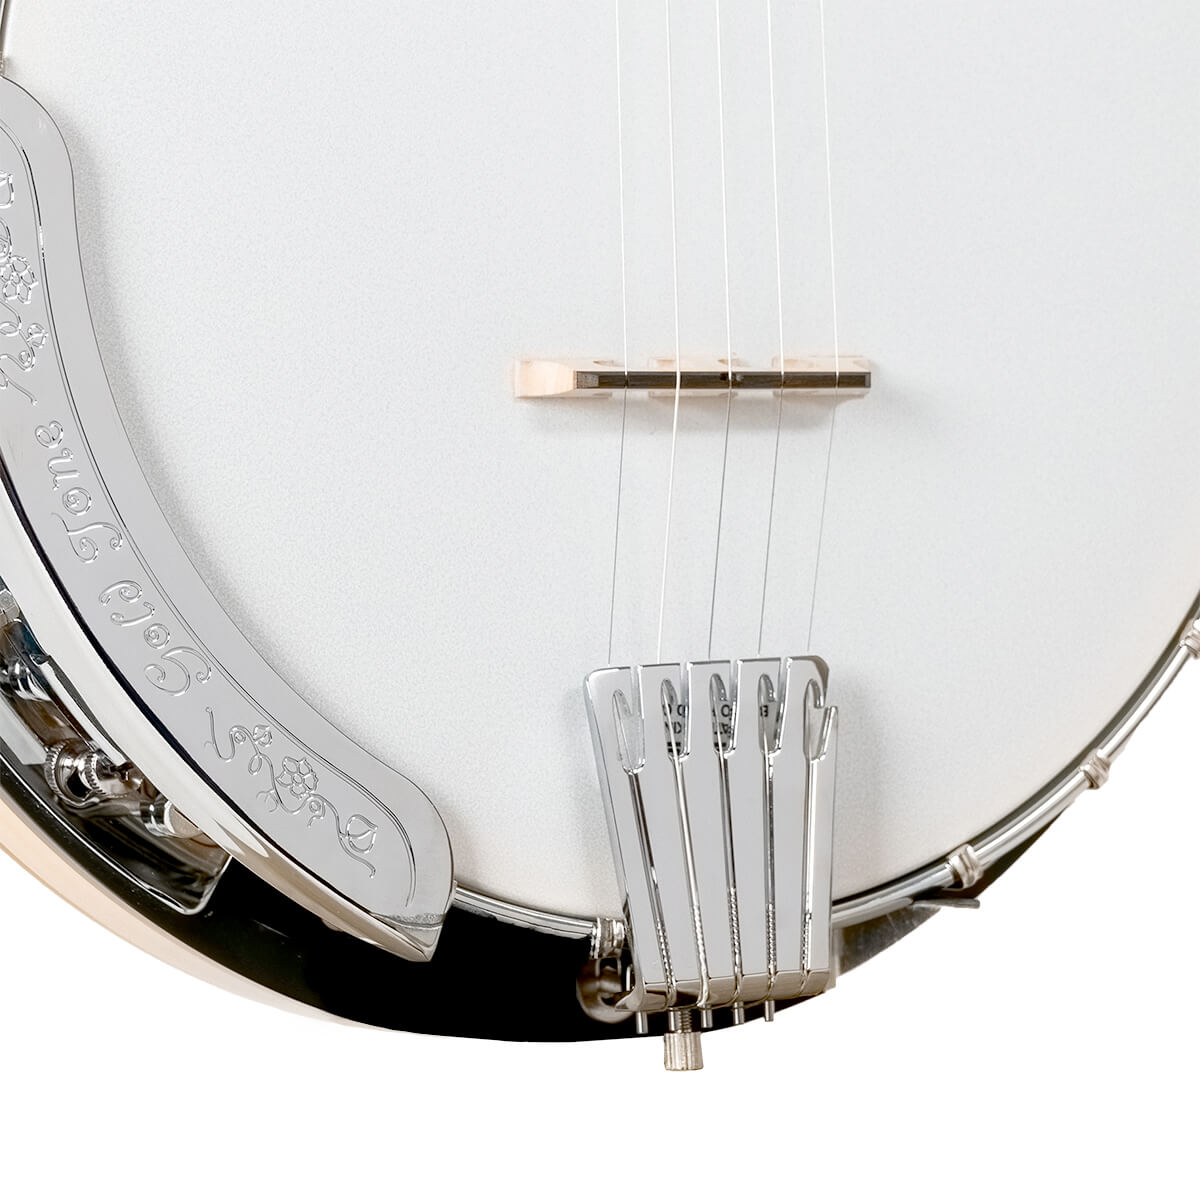 Gold Tone MC-150R/P Maple Classic Banjo with Steel Ring Gloss Natural